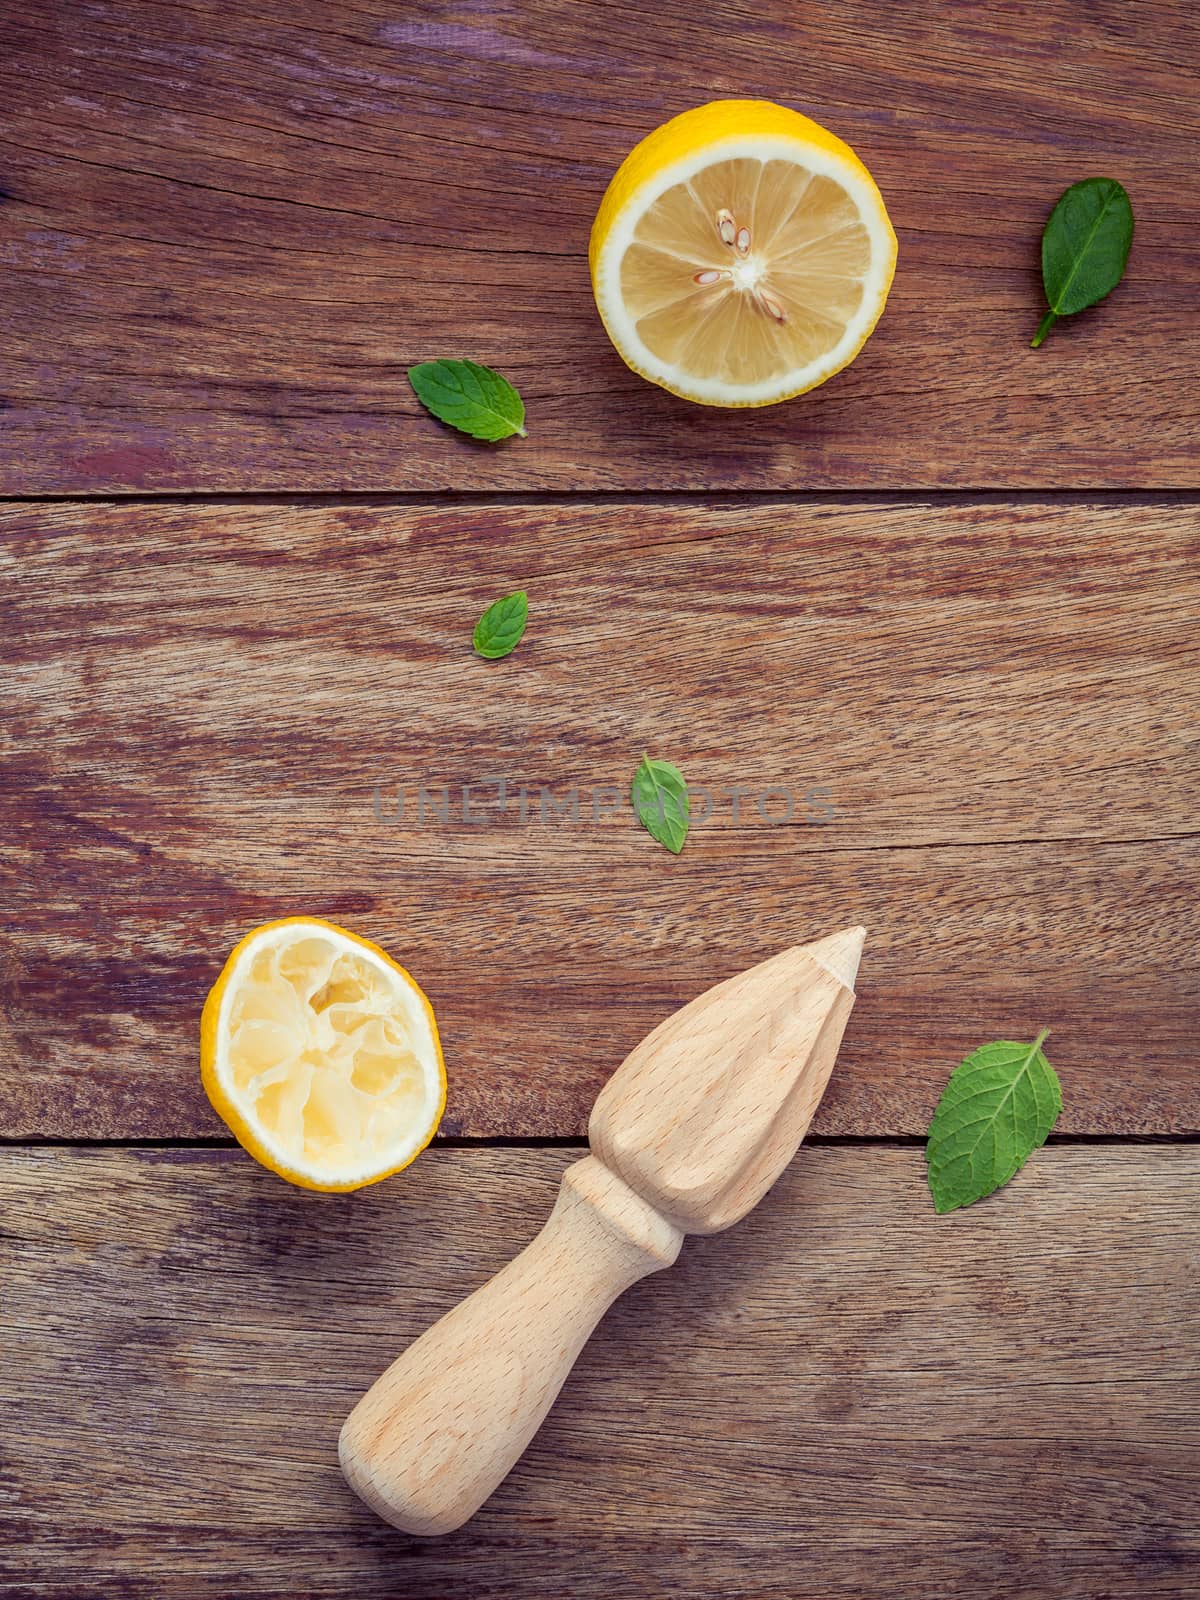 Fresh lemon and wooden juicer for summer juice and cocktail. Fresh lemon sliced and peppermint leaves set up on shabby wooden background flat lay.